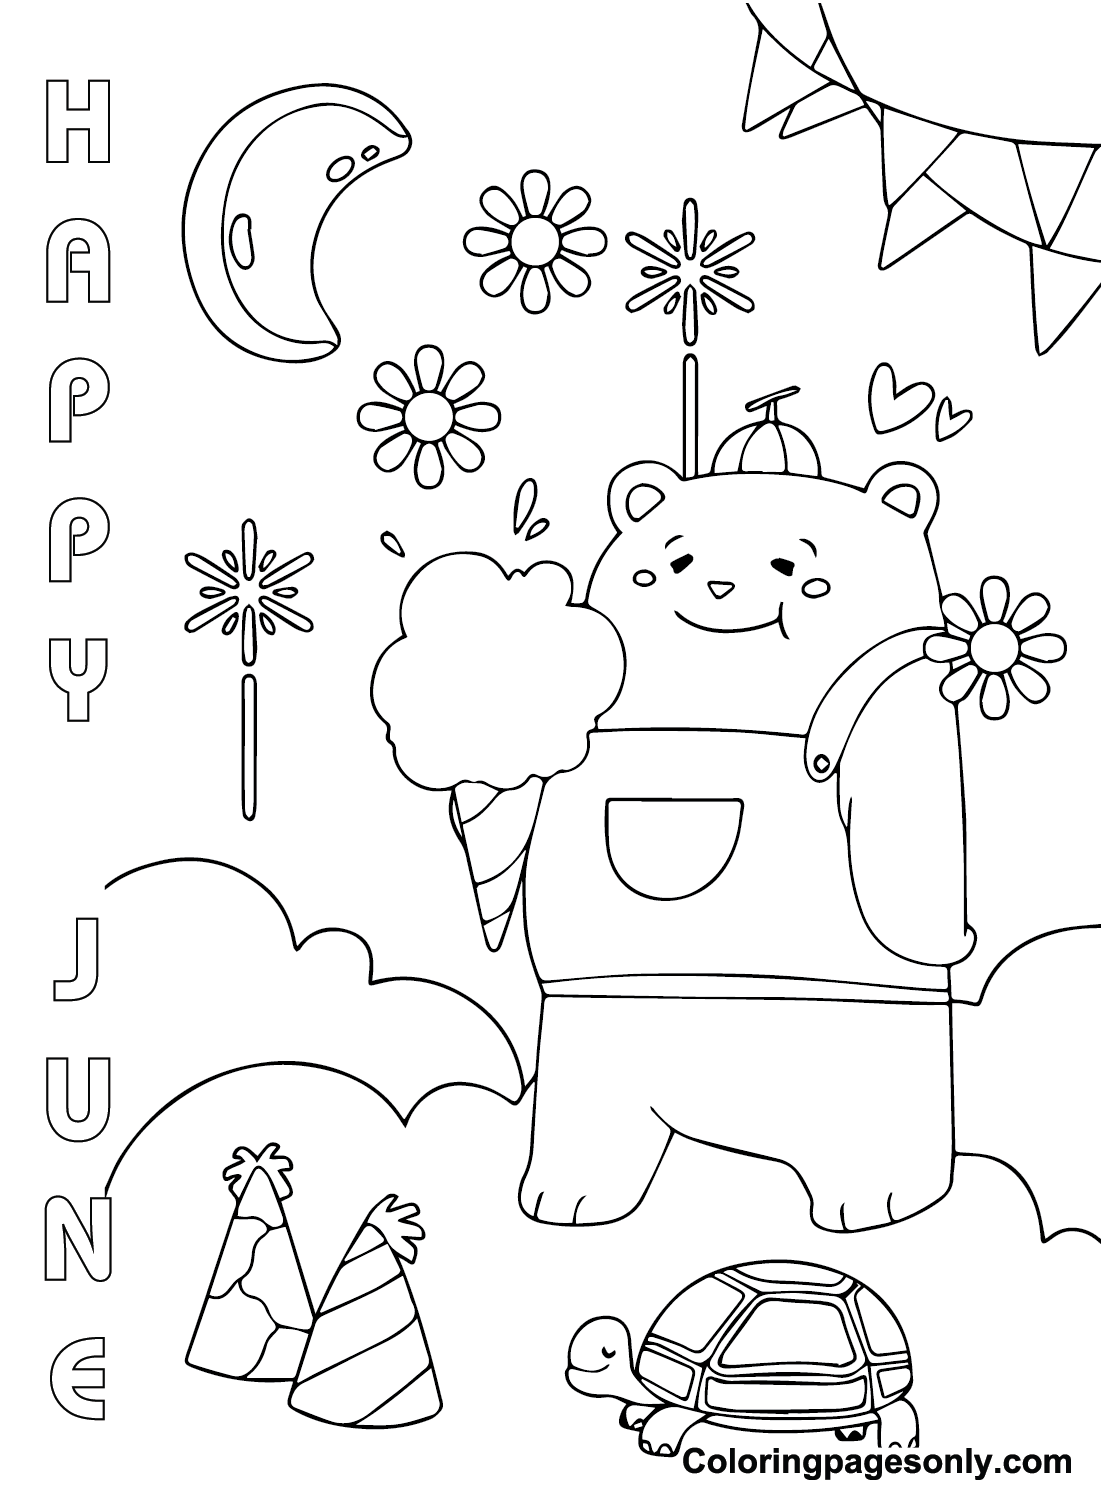 Great June Coloring Page